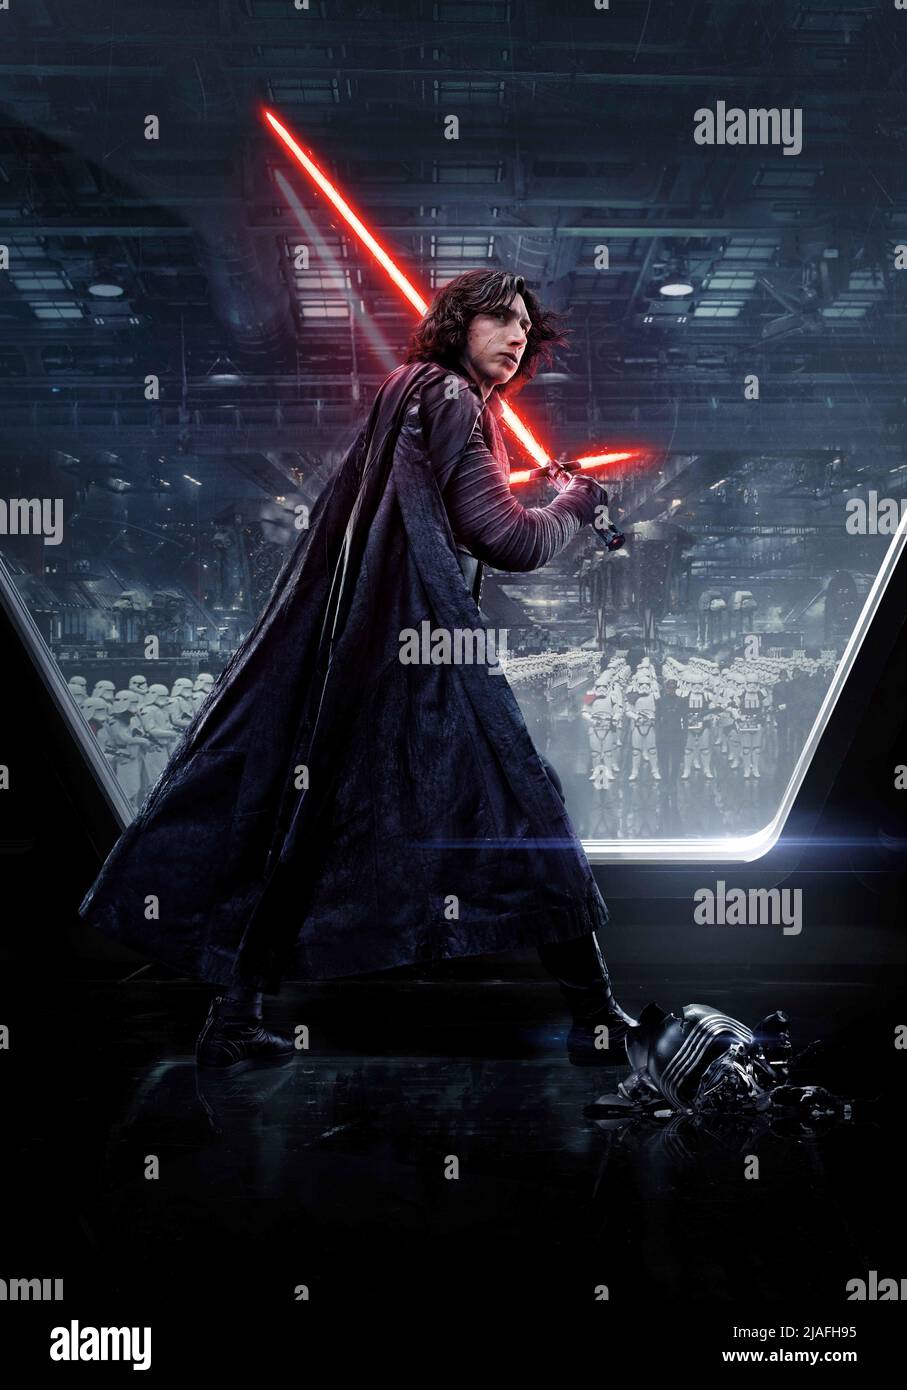 Adam Driver Star Wars Hi Res Stock Photography And Images Page 2 Alamy